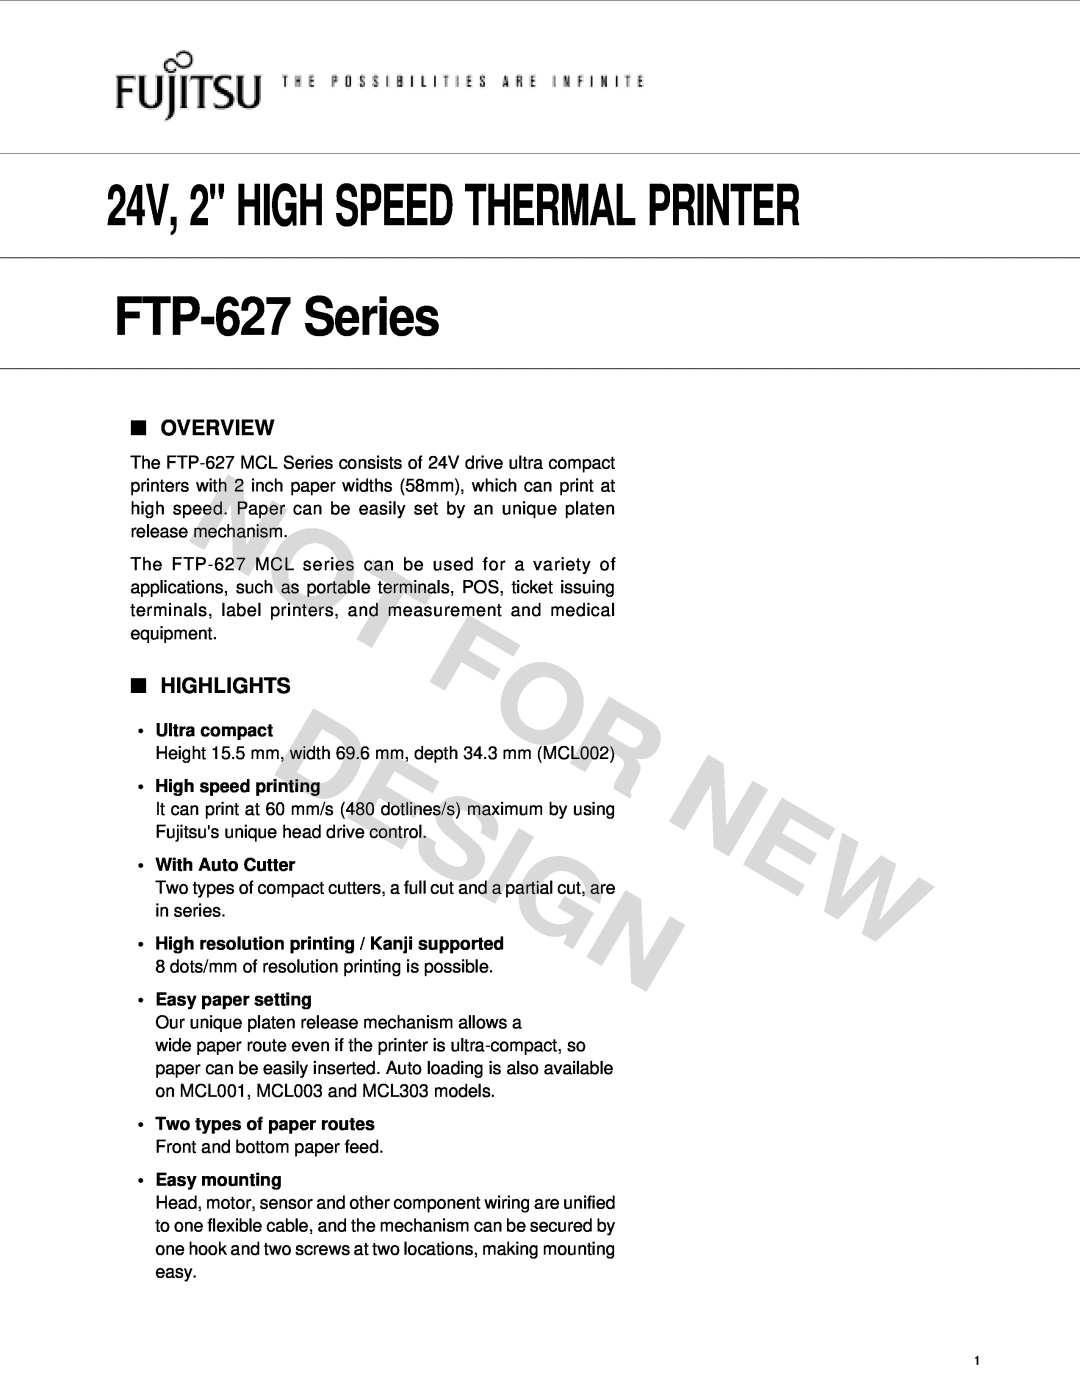 Fujitsu FTP-627 Series manual Overview, Highlights, Design, 24V, 2 HIGH SPEED THERMAL PRINTER 